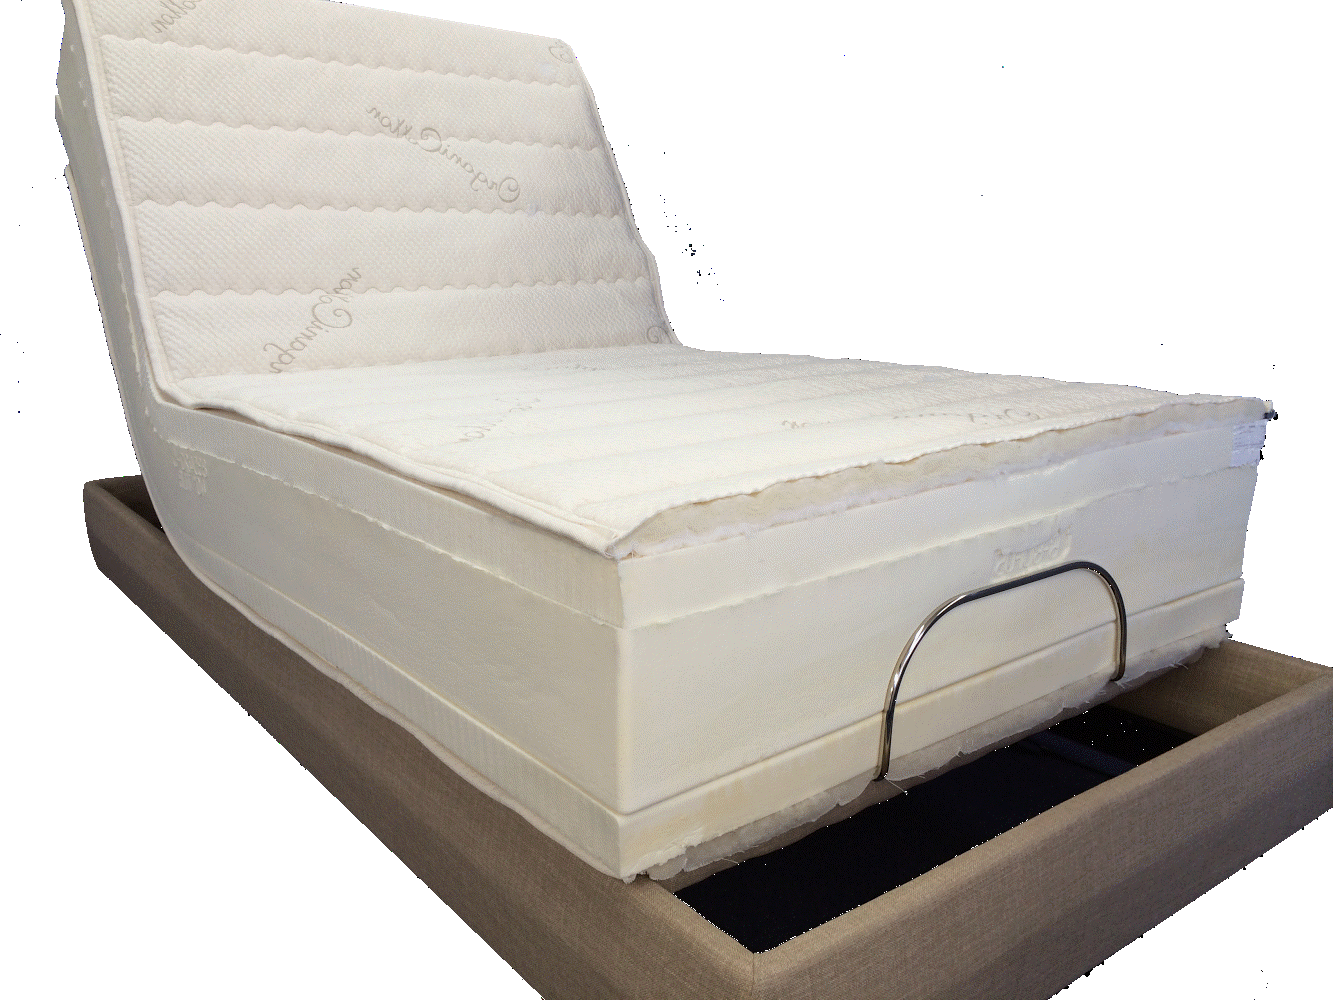 11andquot; Firmer Best Quality Electric Adjustable Bed Firmest Latex Mattress